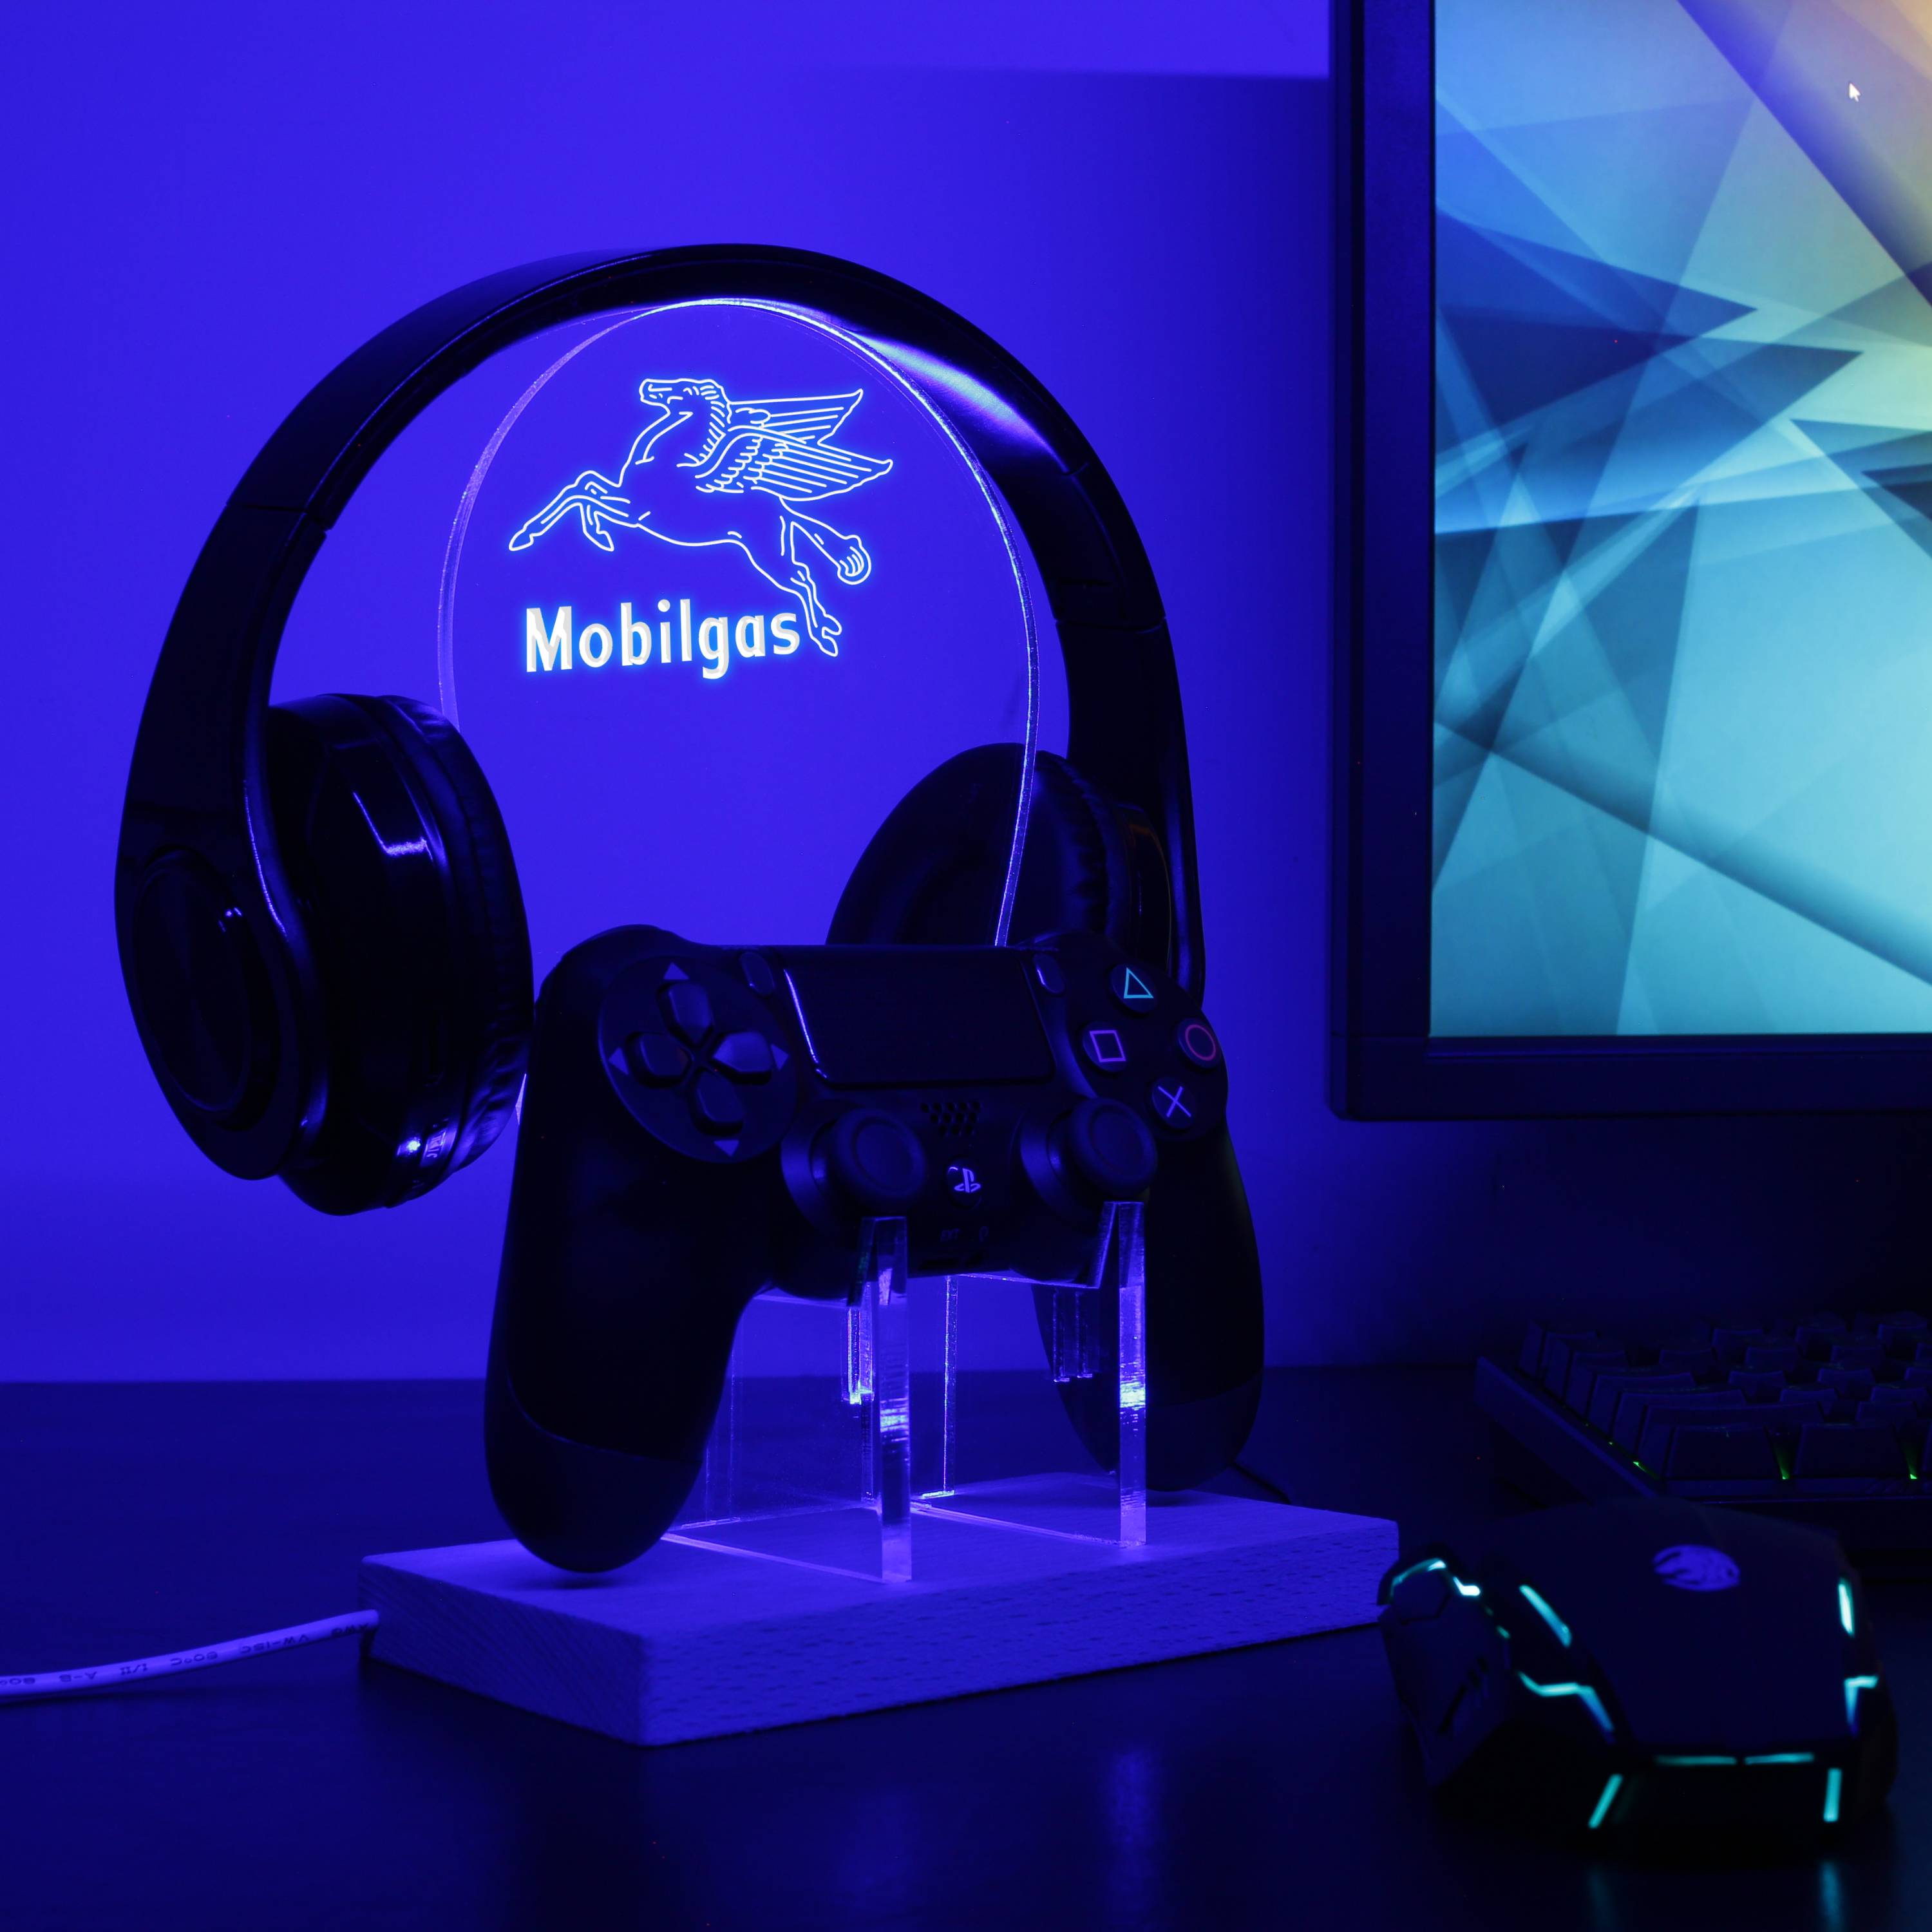 Mobil Gas Flying Horse LED Gaming Headset Controller Stand